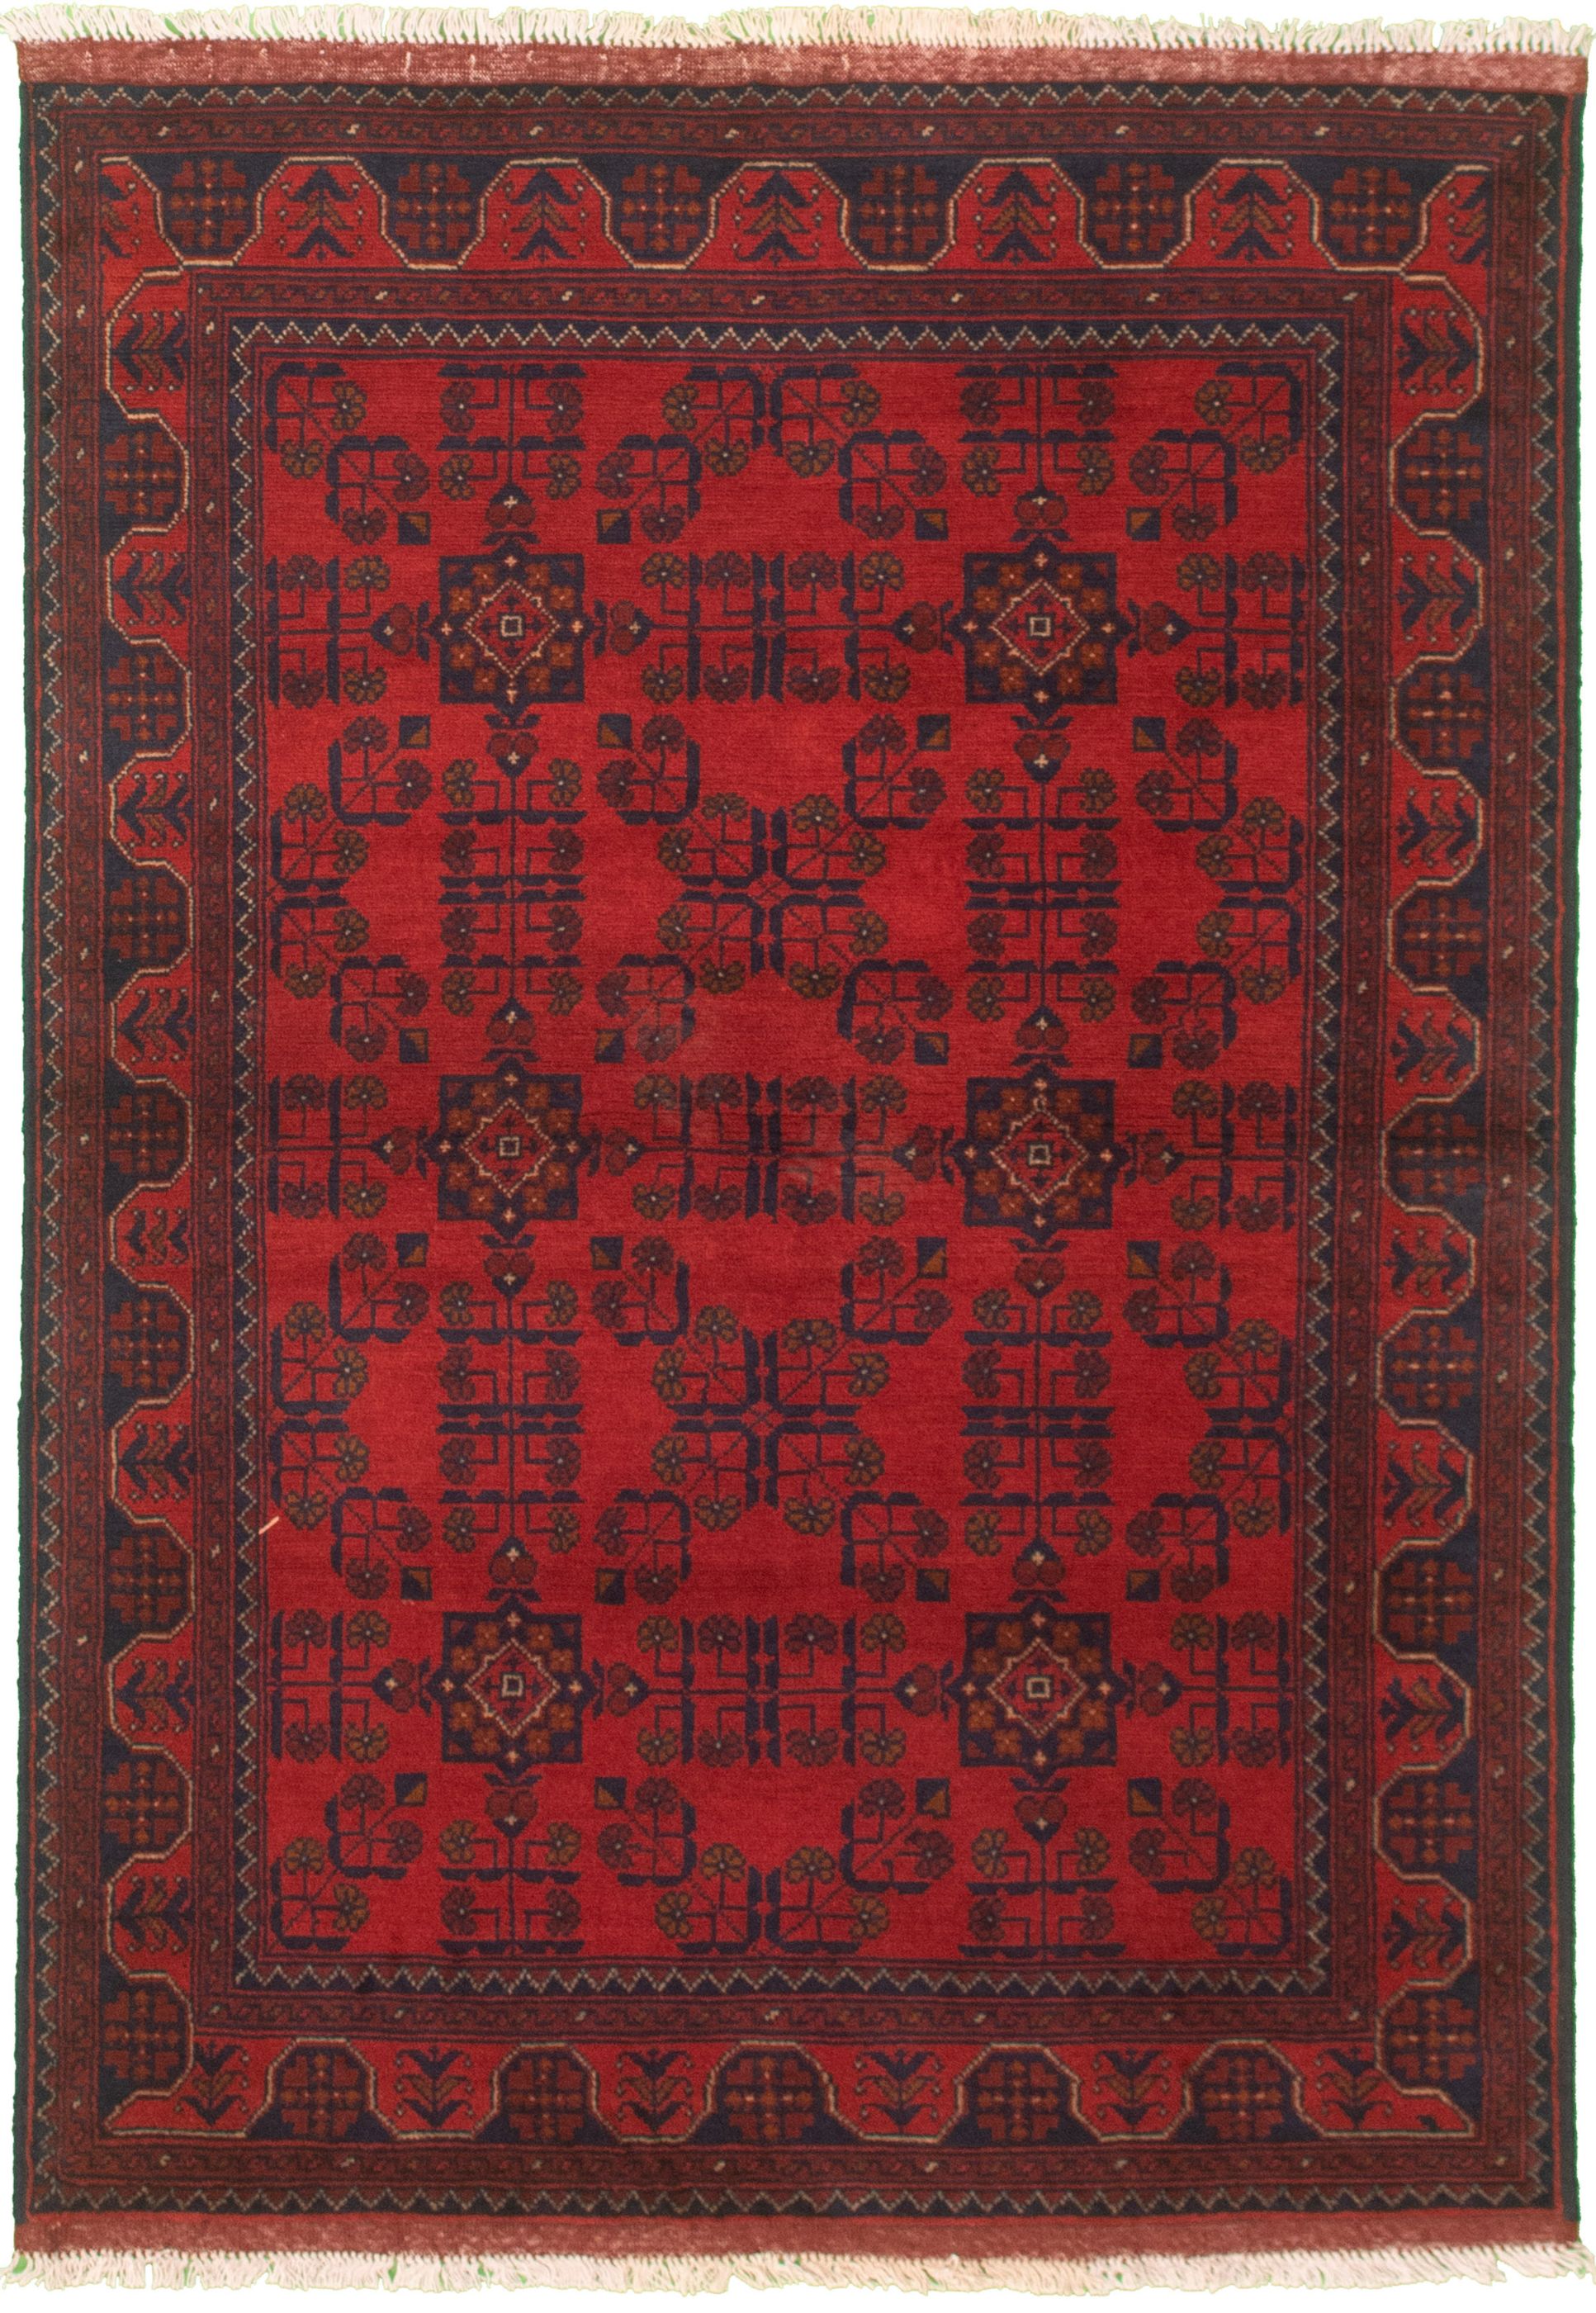 Hand-knotted Finest Khal Mohammadi Red Wool Rug 4'3" x 6'2"  Size: 4'3" x 6'2"  